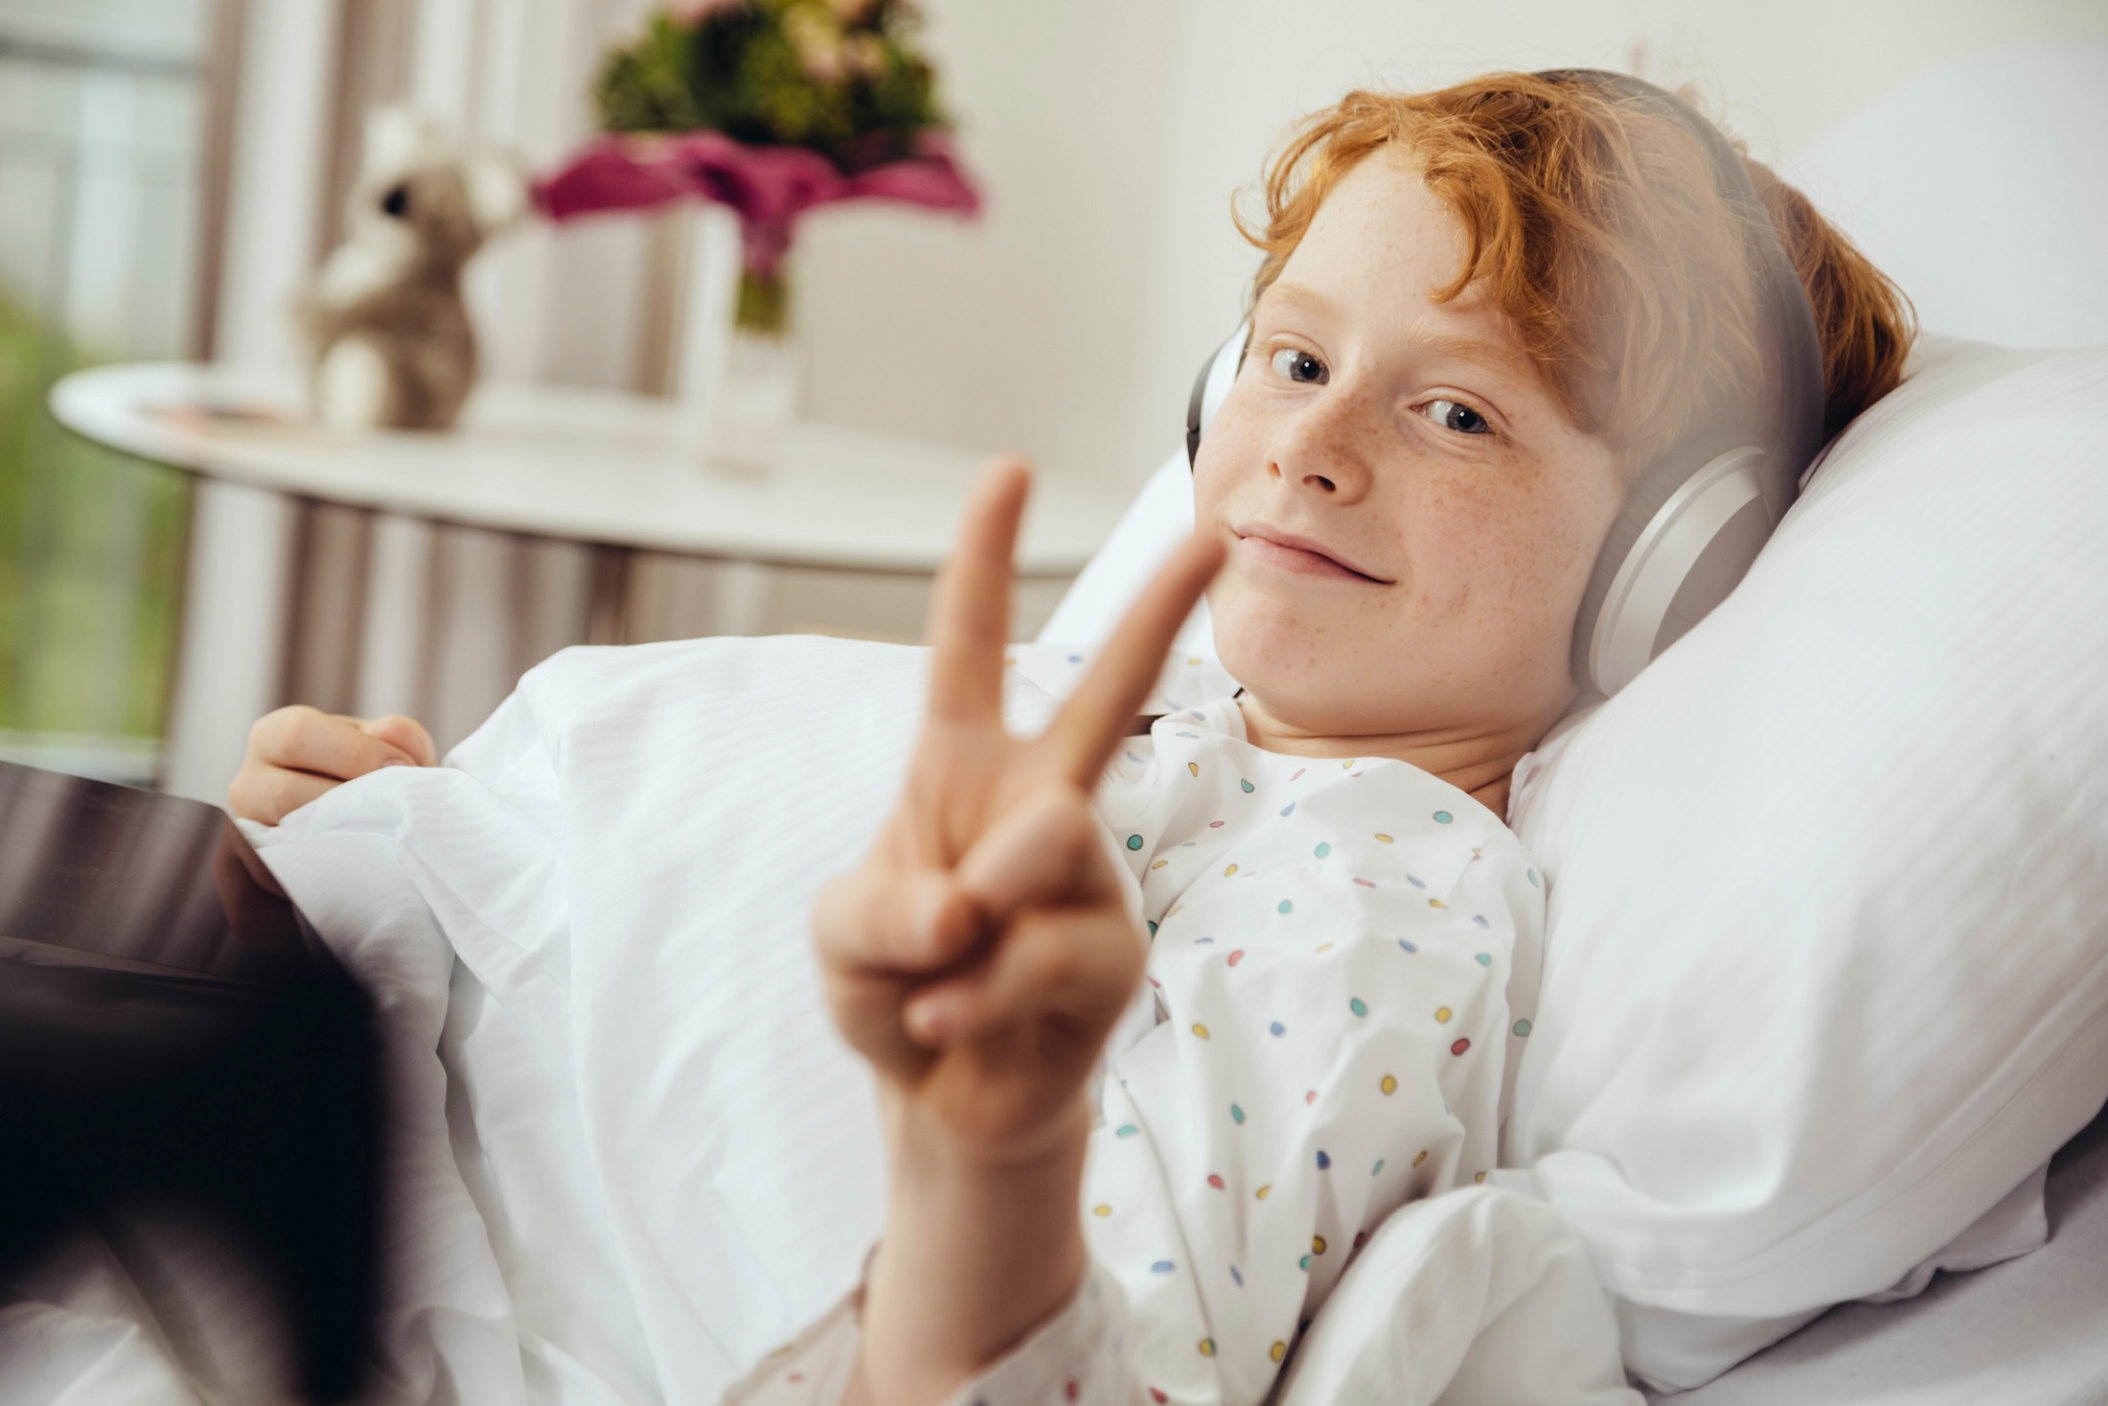 Young boy showing V sign while lying in hospital bed and listening to music